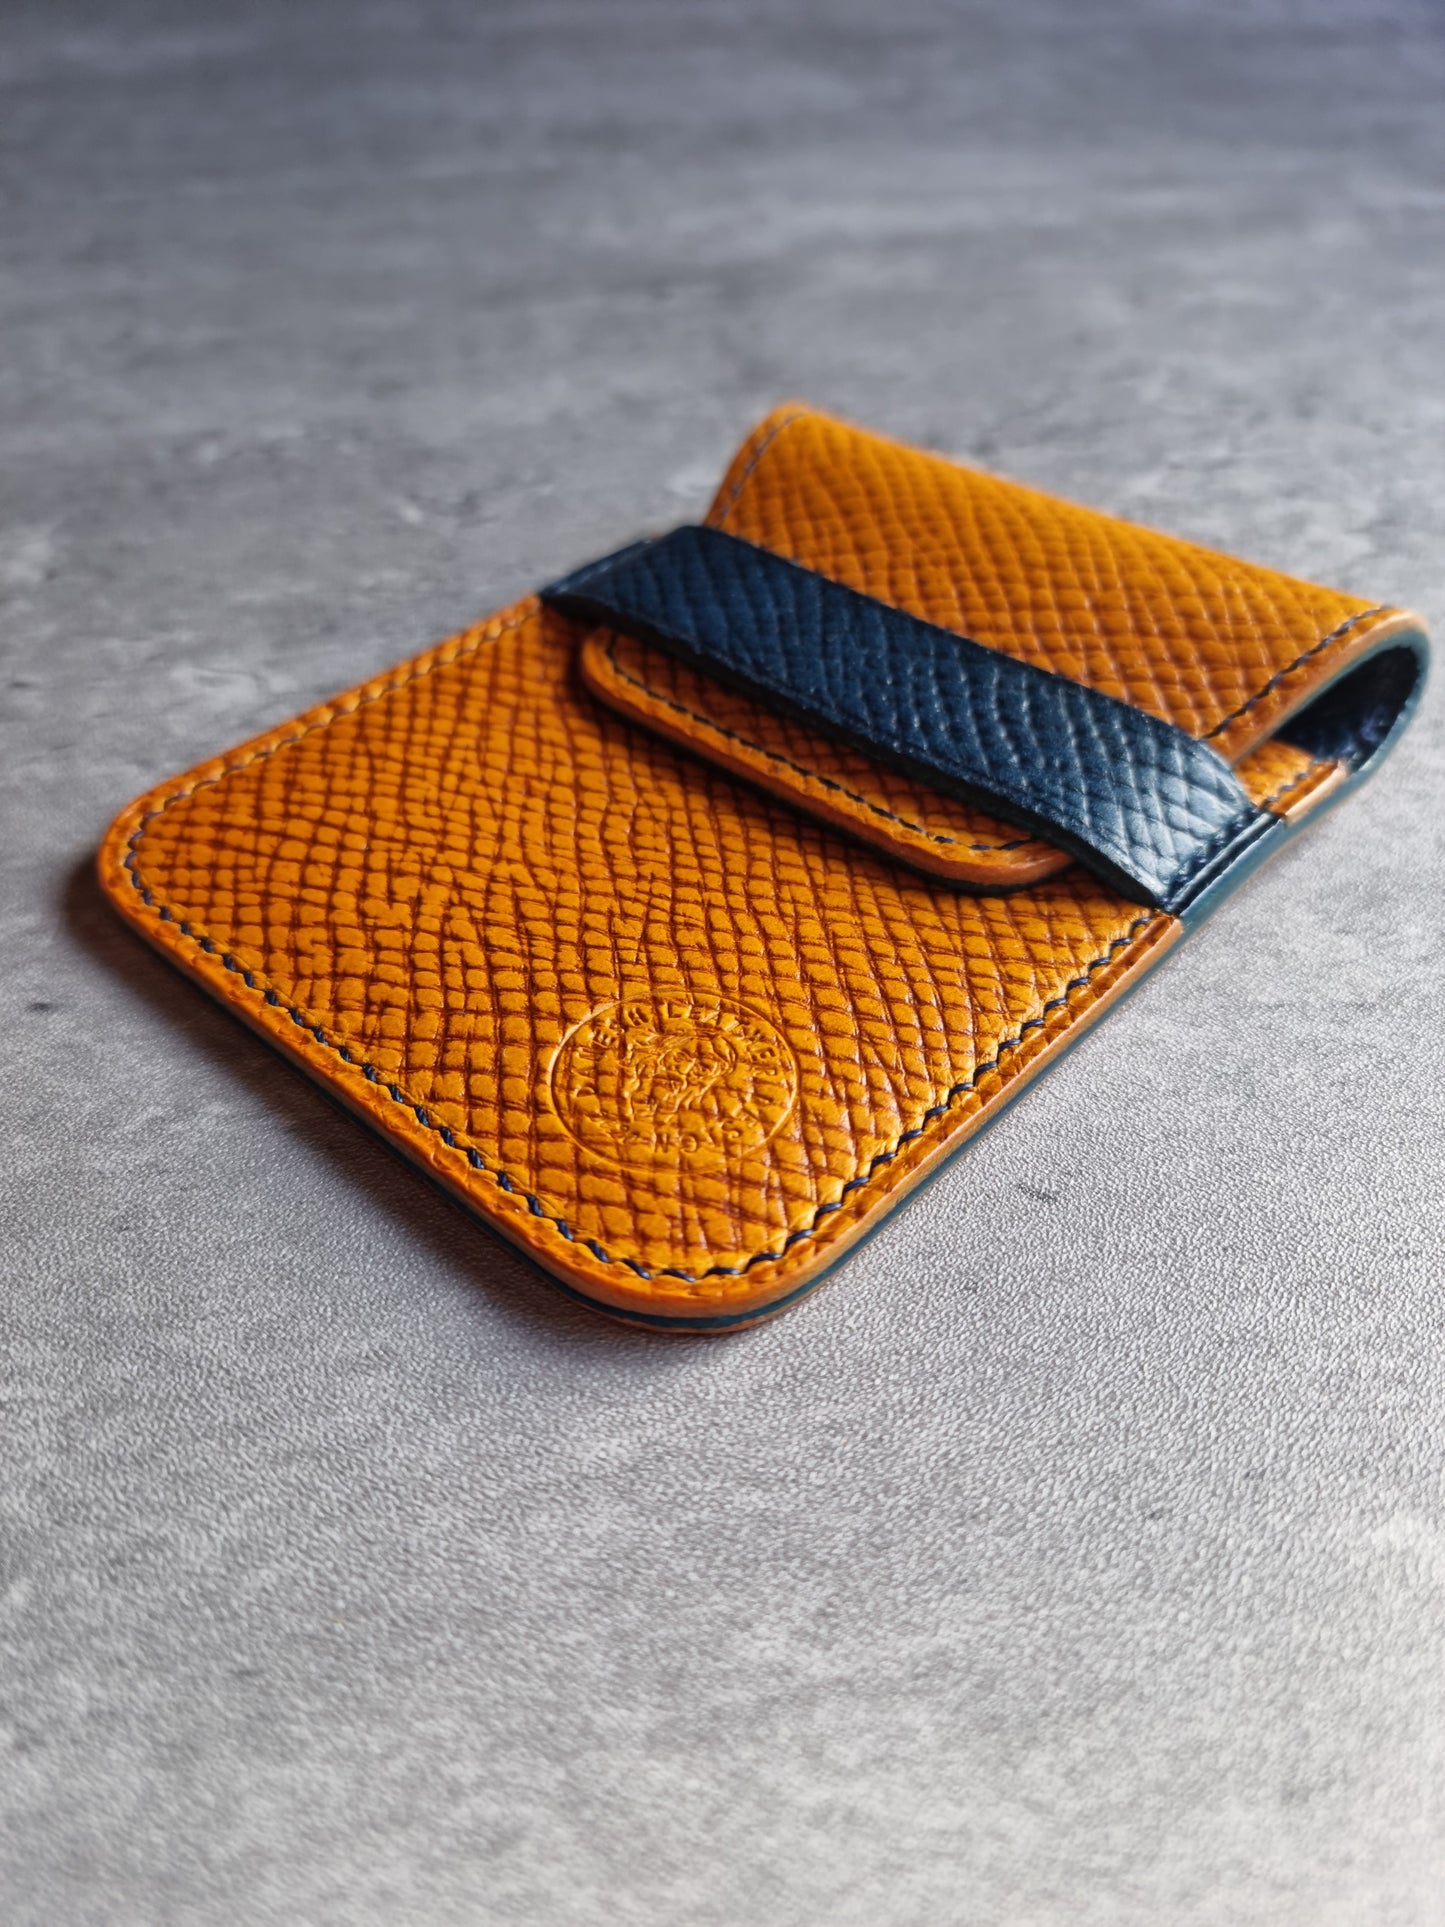 The Helsing flap wallet - Leather craft pattern | DIY | Pdf template